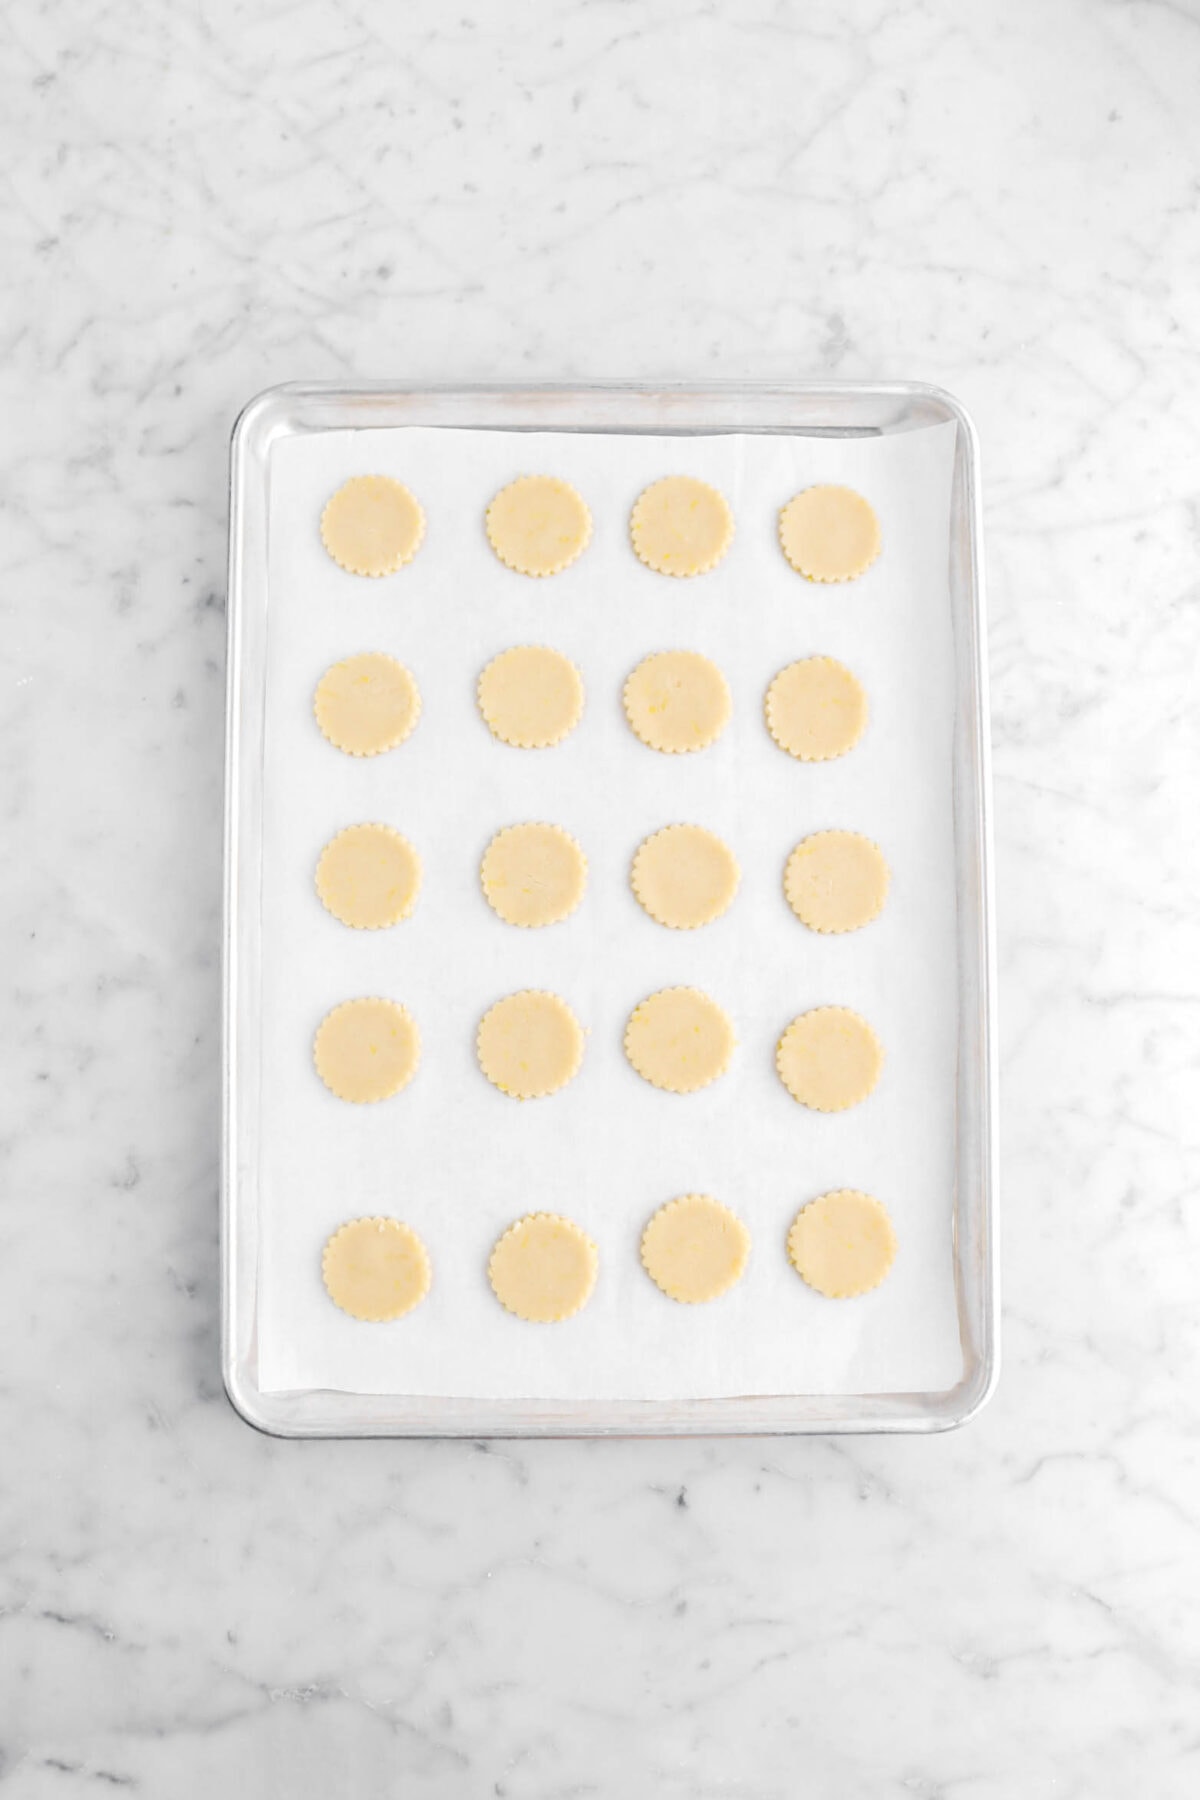 20 unbaked cookies on lined sheet pan.